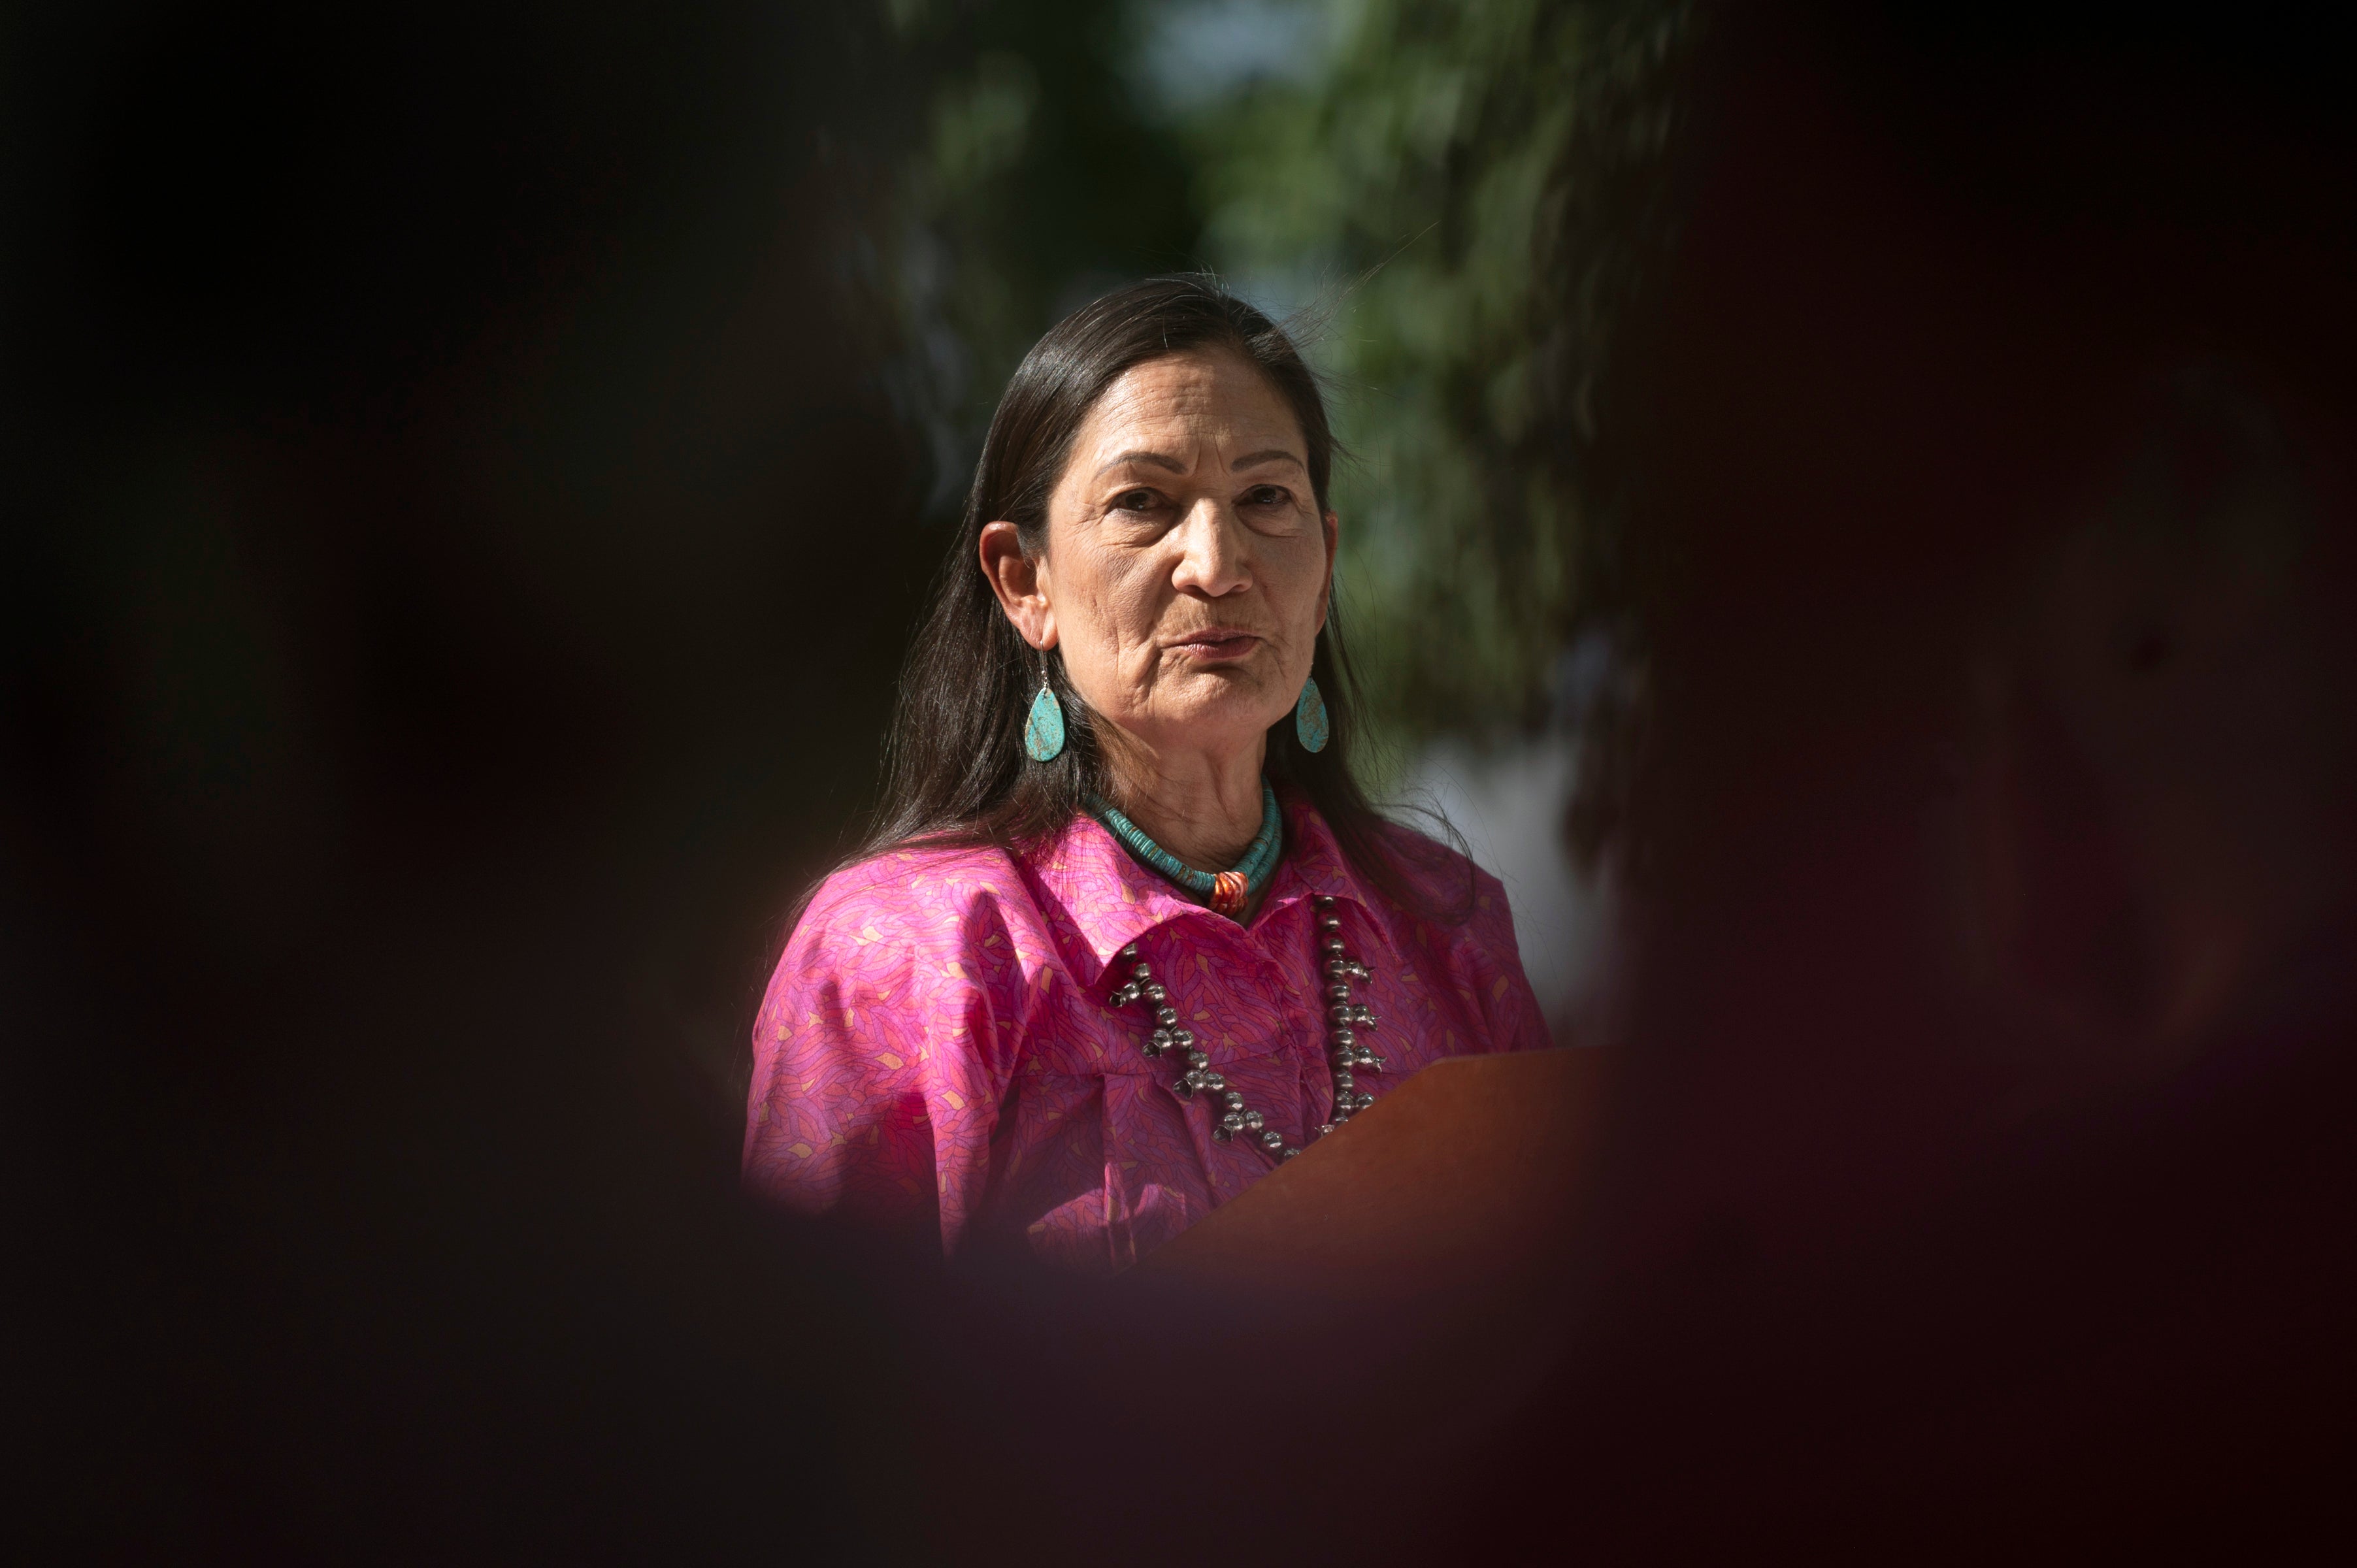 US Interior Secretary Deb Haaland is pictured speaking at a Bureau of Indian Affairs event in New Mexico on 11 June